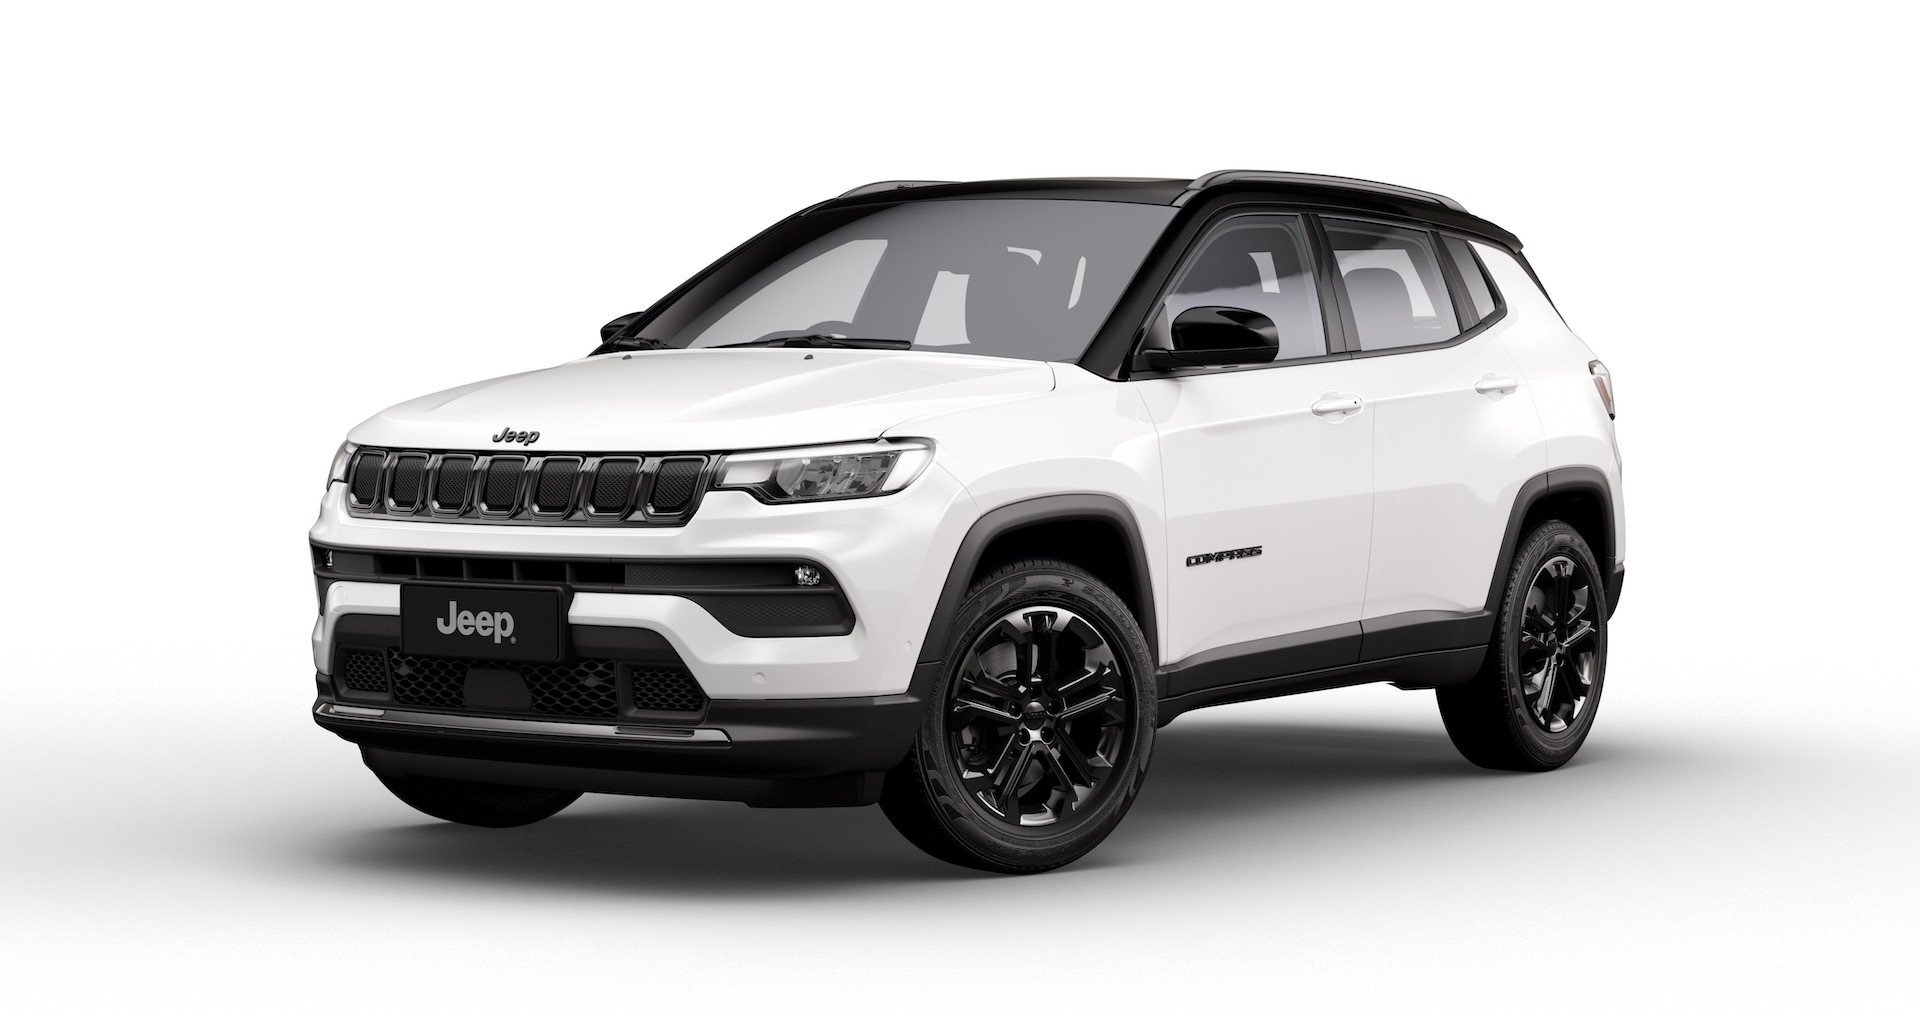 2022 Jeep Compass update announced, adds Night Eagle variant